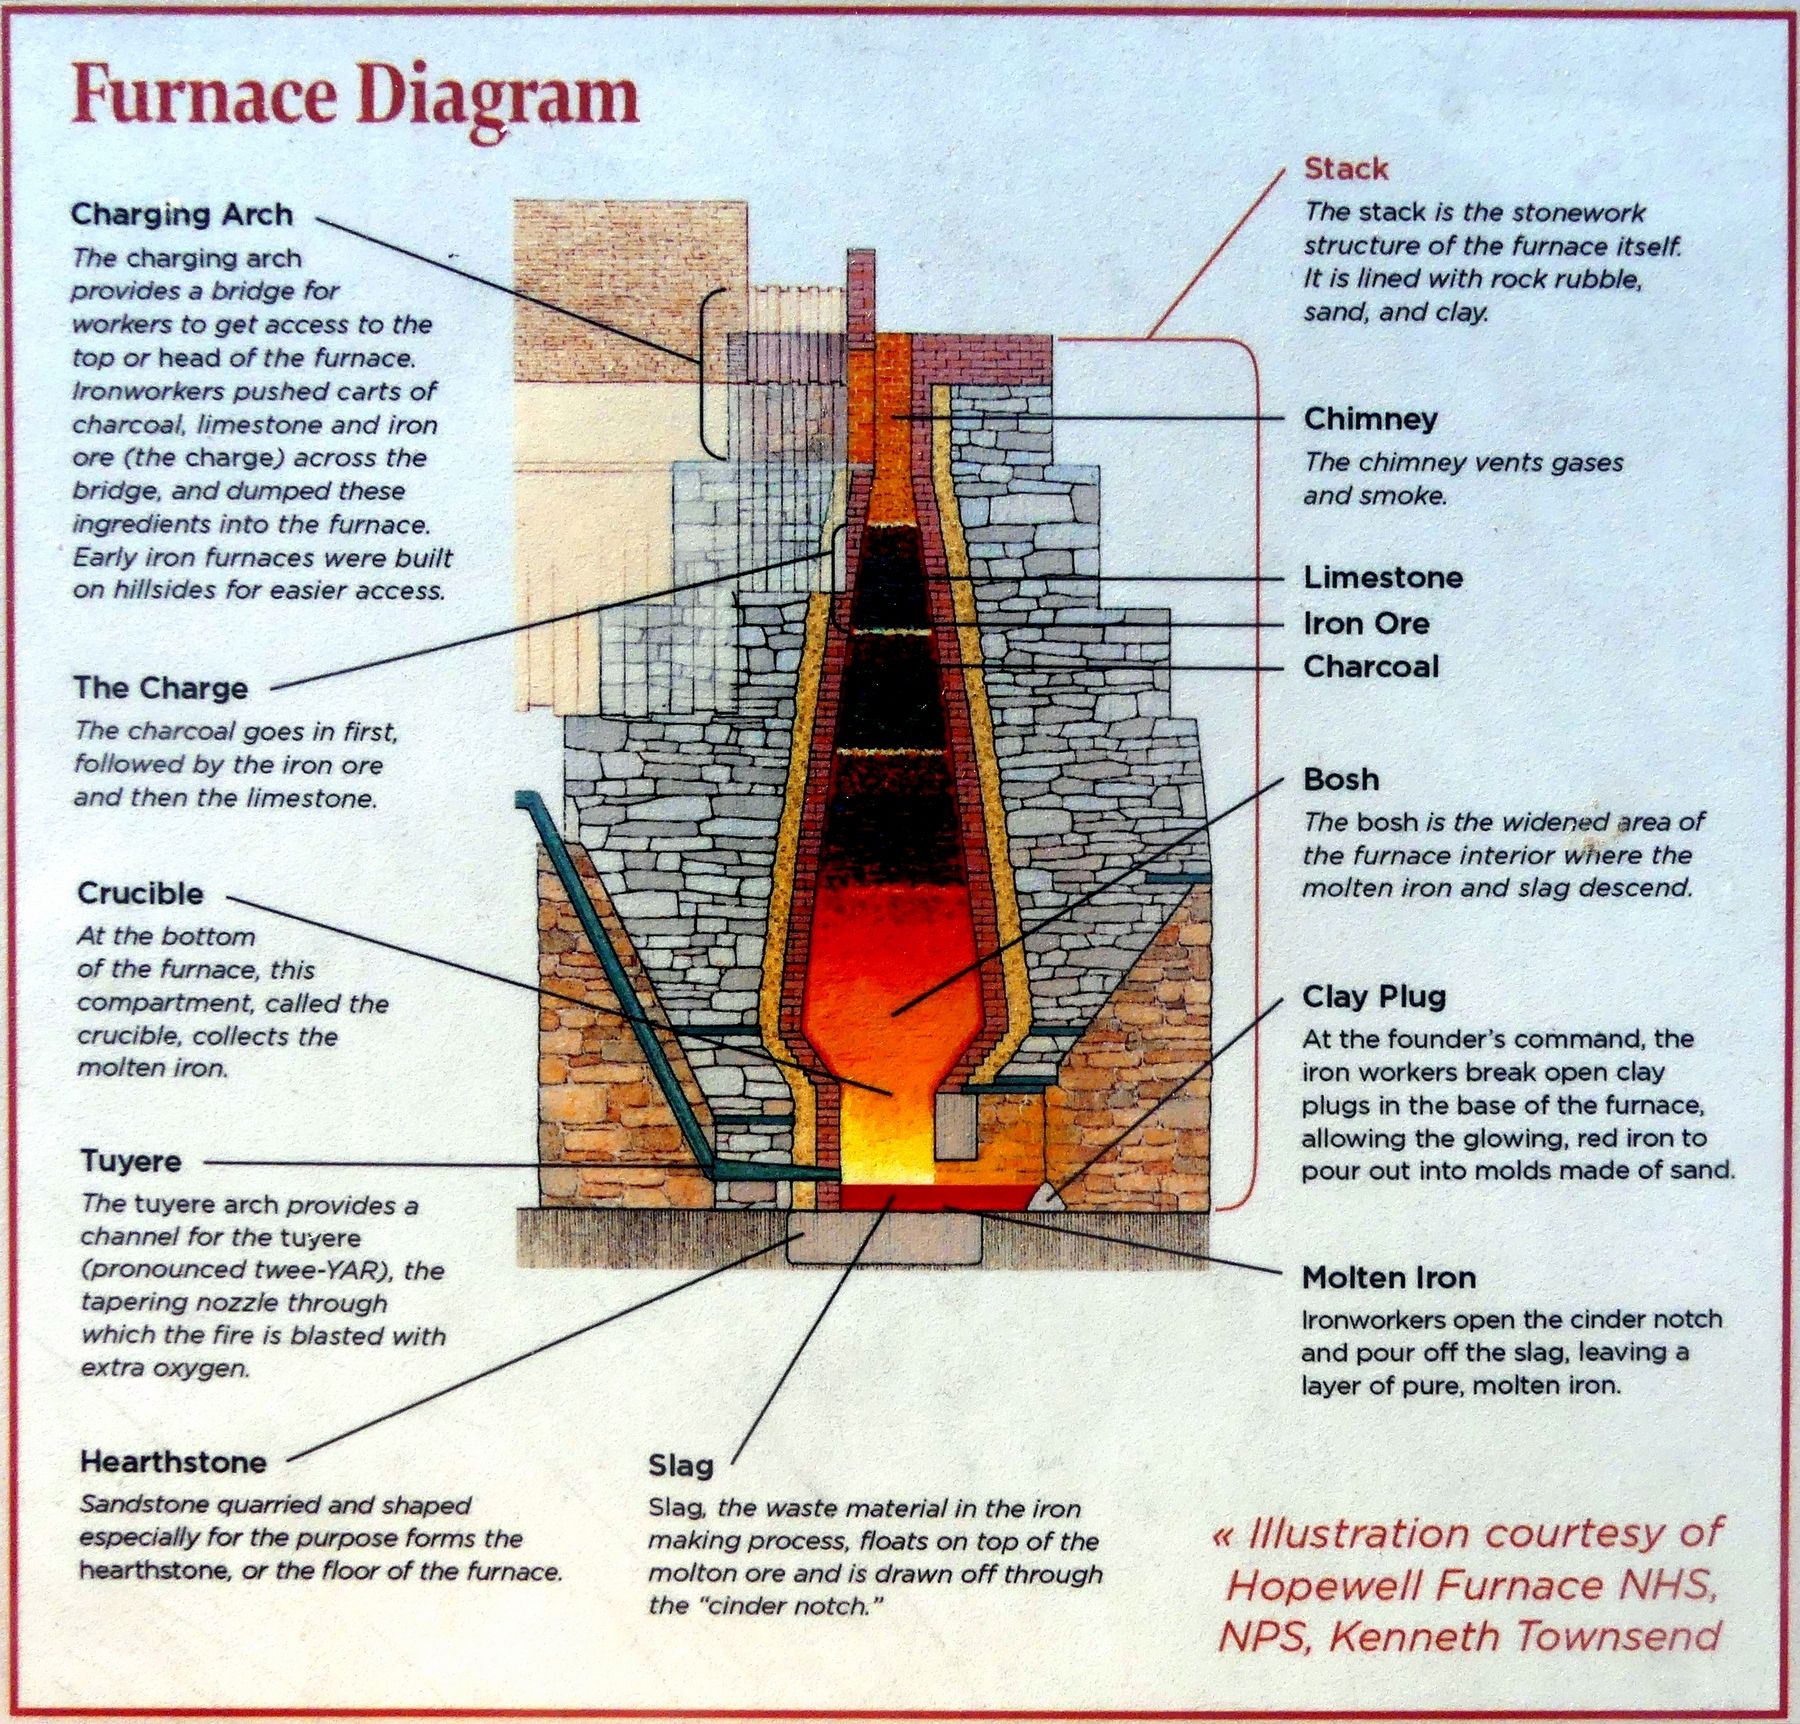 Furnace Diagram image. Click for full size.